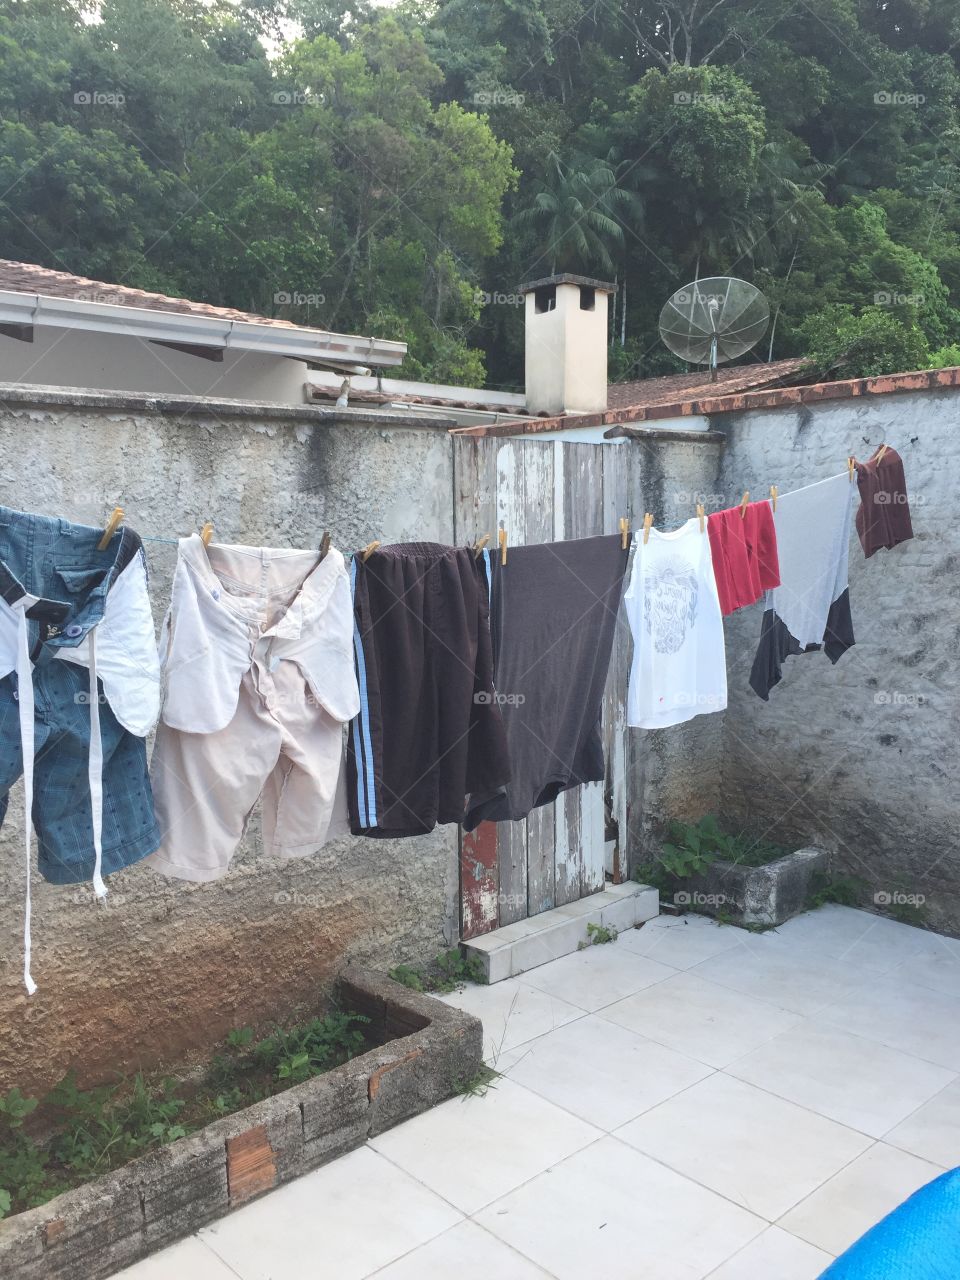 Clothes on the clothesline